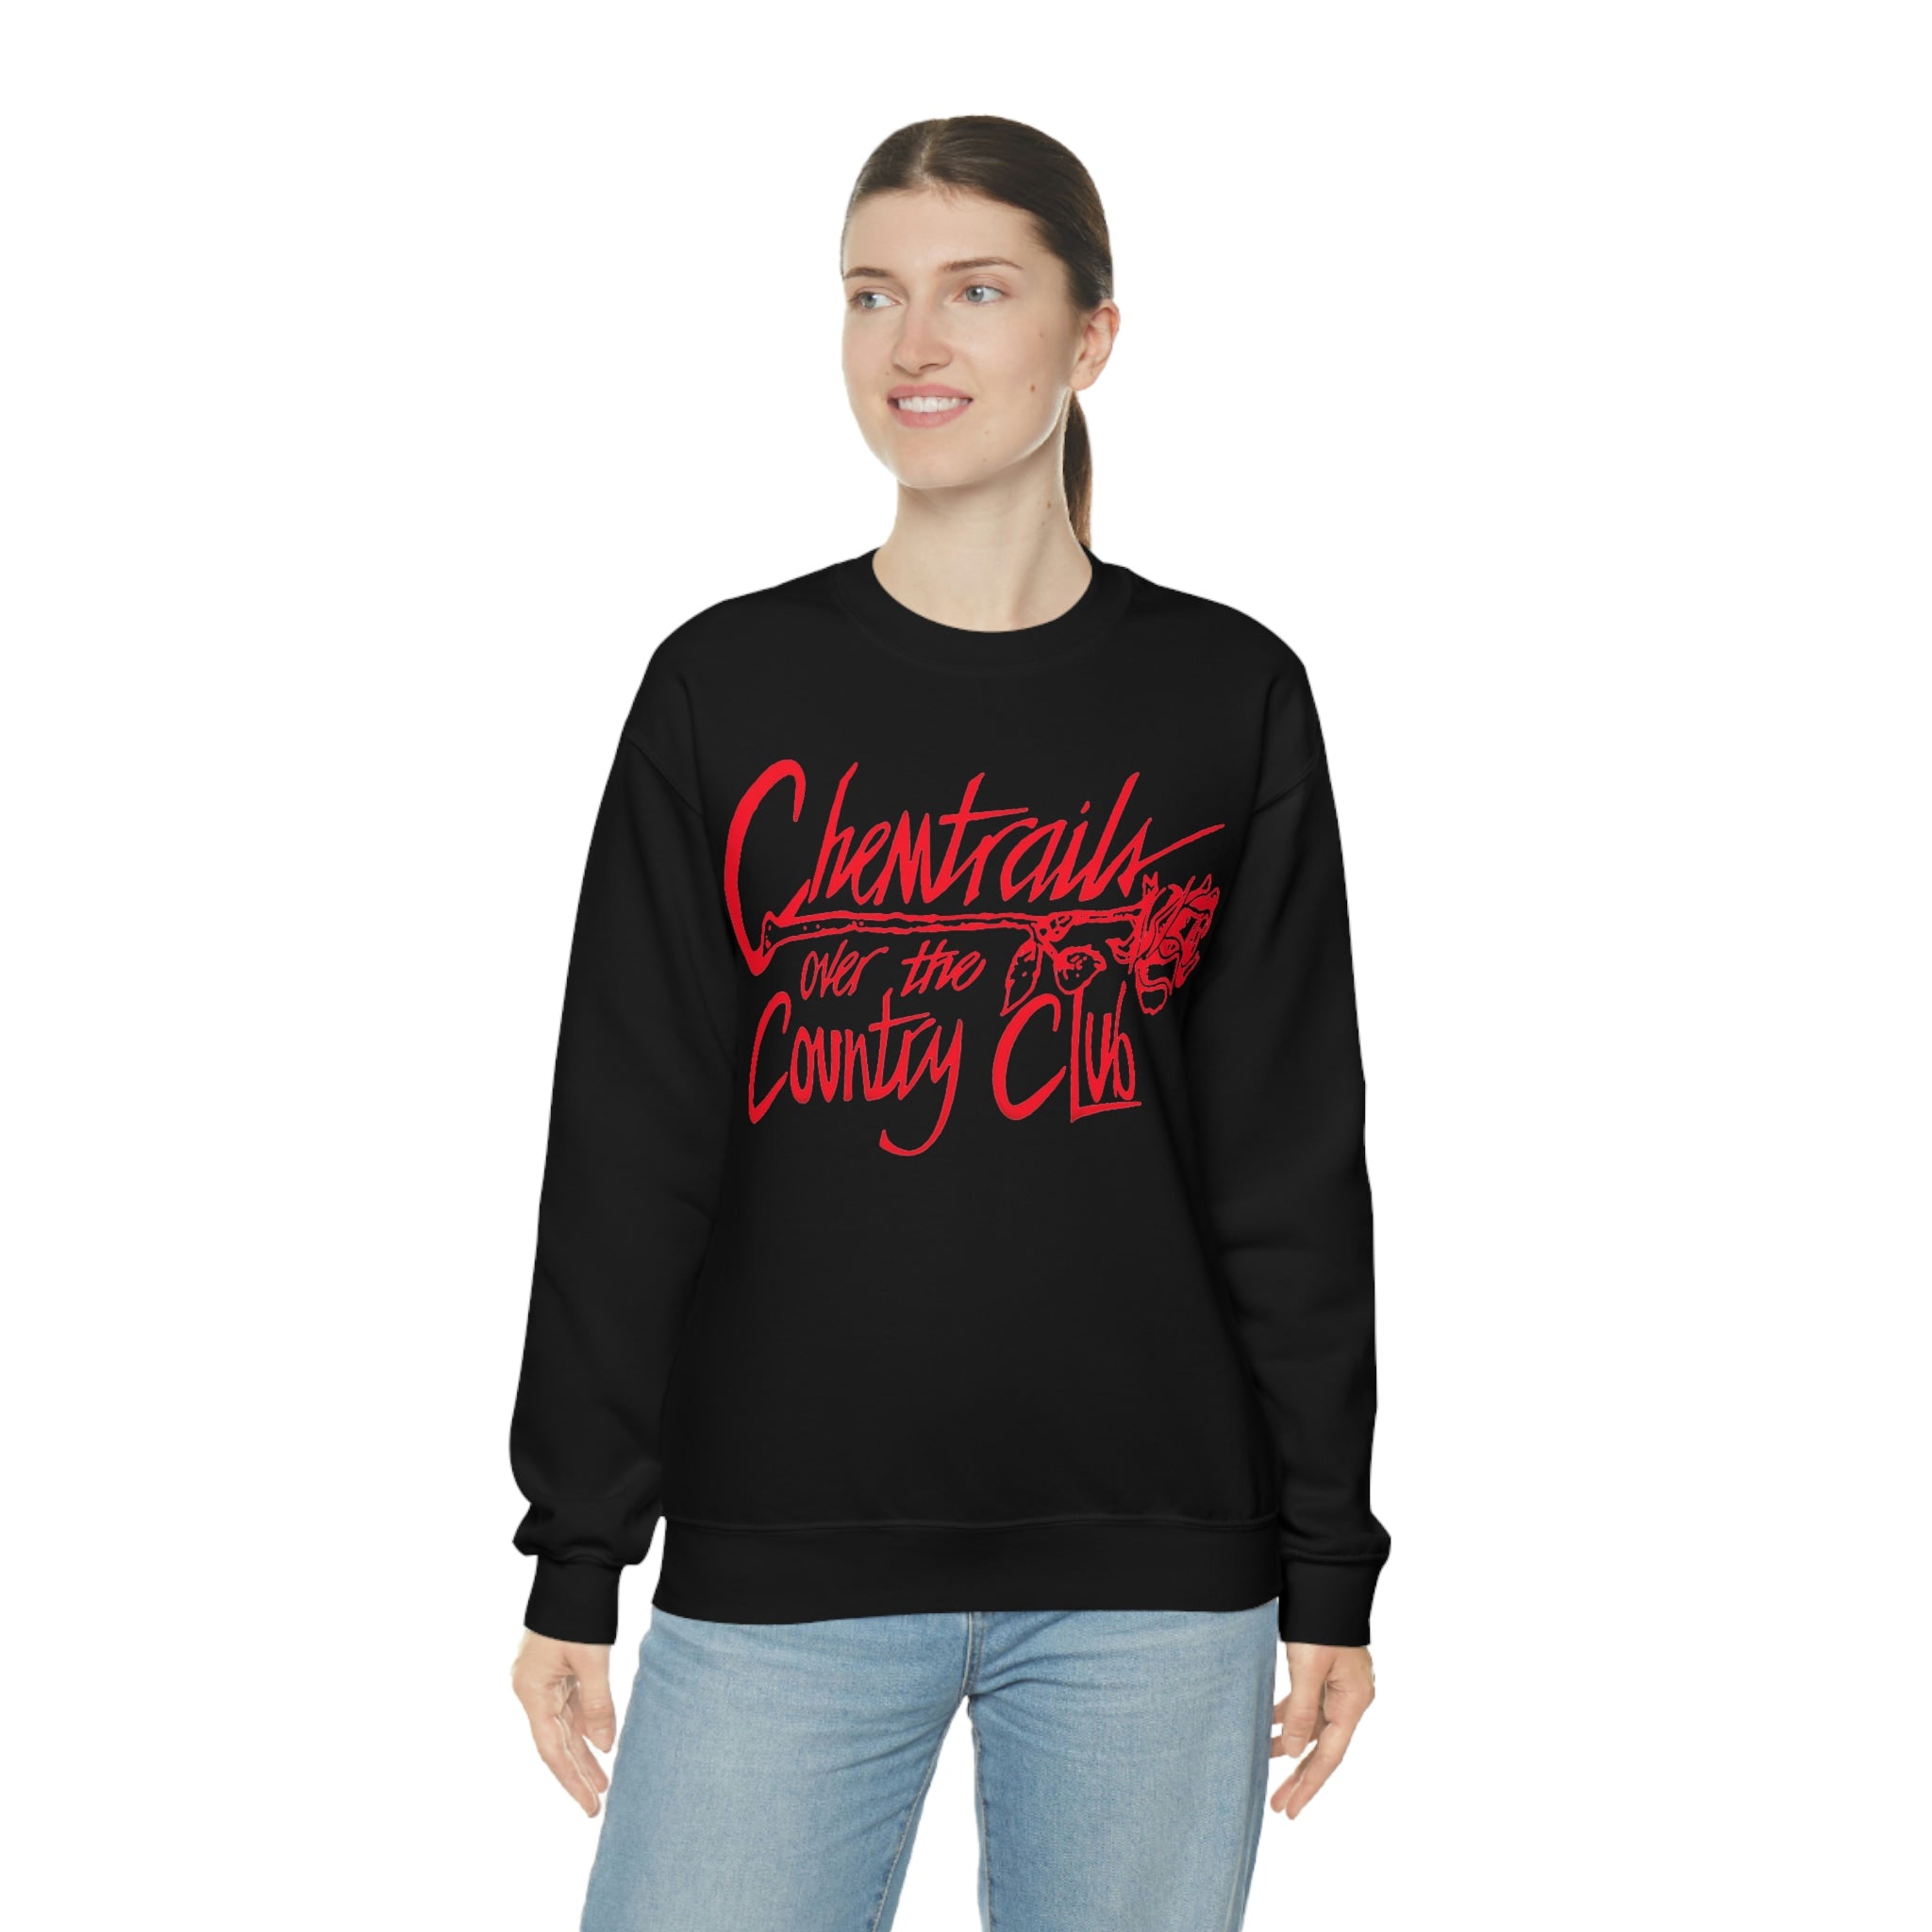 lana del rey shirt chemtrails over the country club Sweatshirt